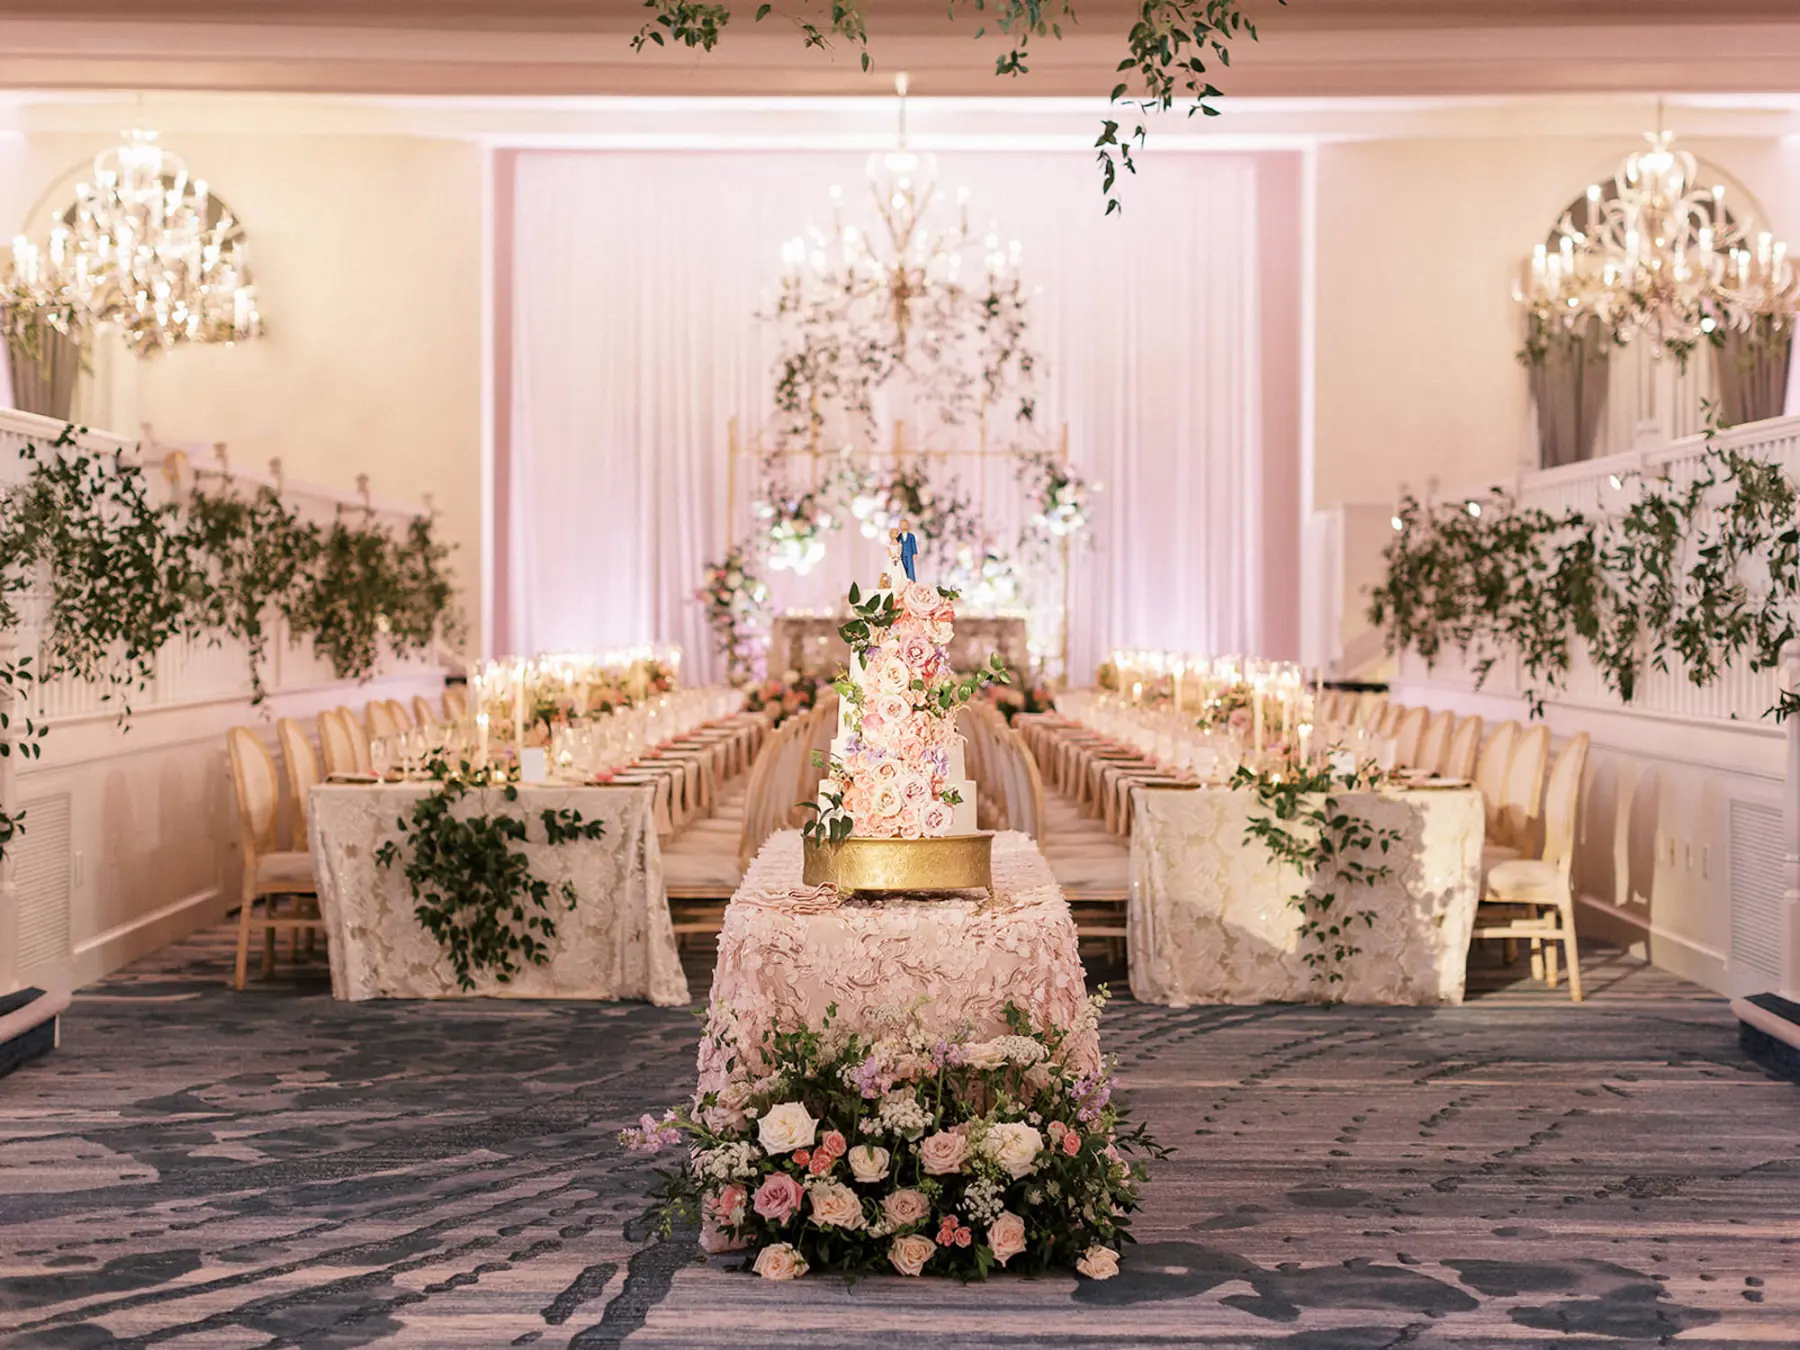 Whimsical Bridgerton Ballroom Wedding Reception Cake Table Inspiration | Cascading Pink Roses on Five-Tiered Wedding Cake Ideas | Tampa Bay Event Venue Don CeSar | St Pete Rental A Chair Affair | Kate Ryan Event Rentals